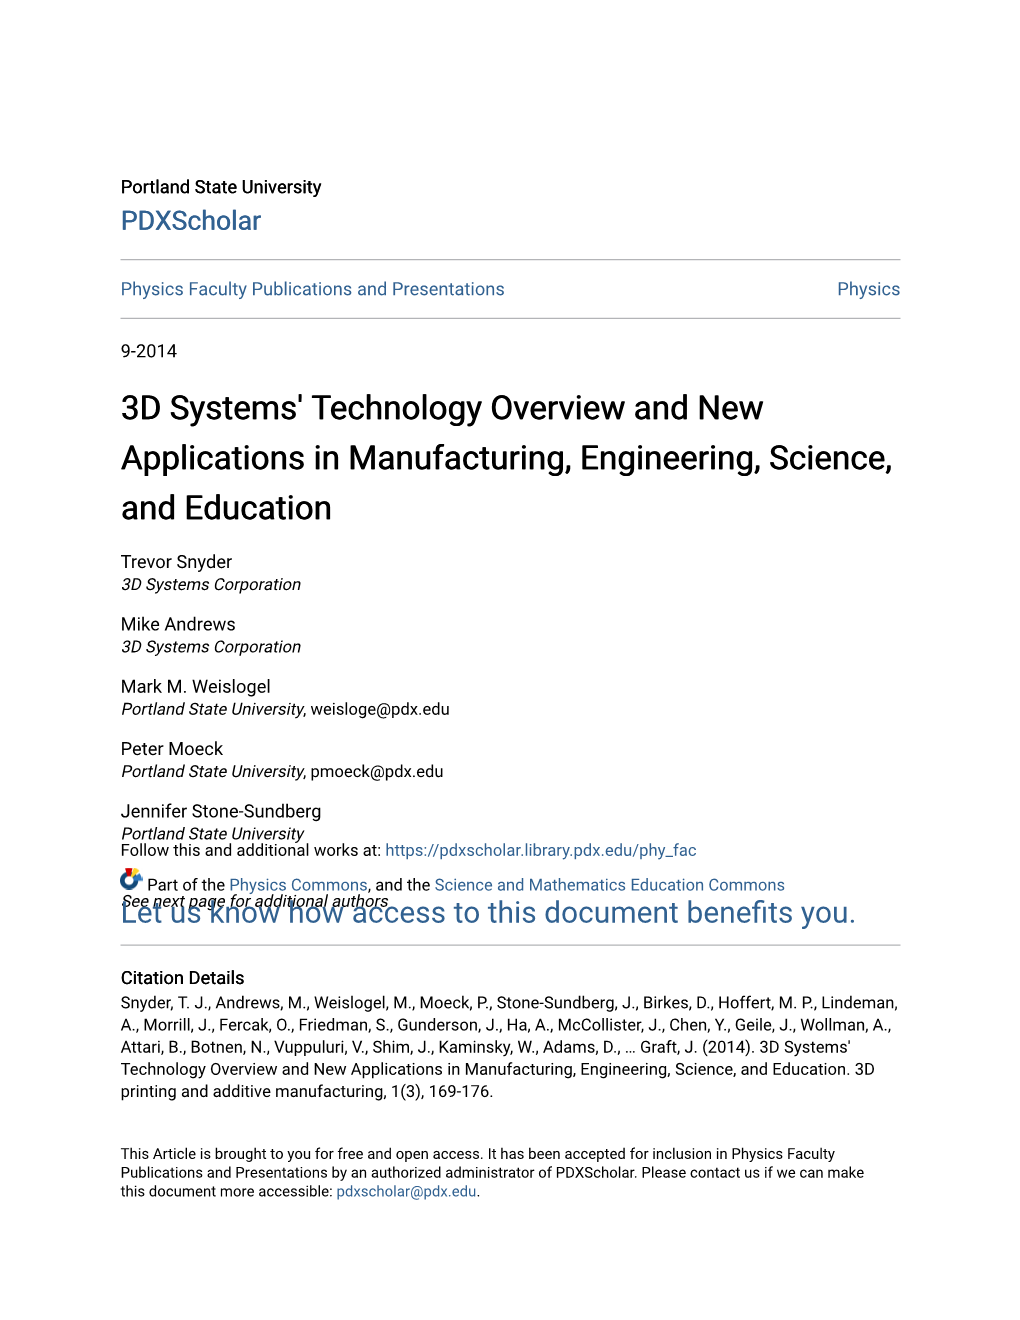 3D Systems' Technology Overview and New Applications in Manufacturing, Engineering, Science, and Education